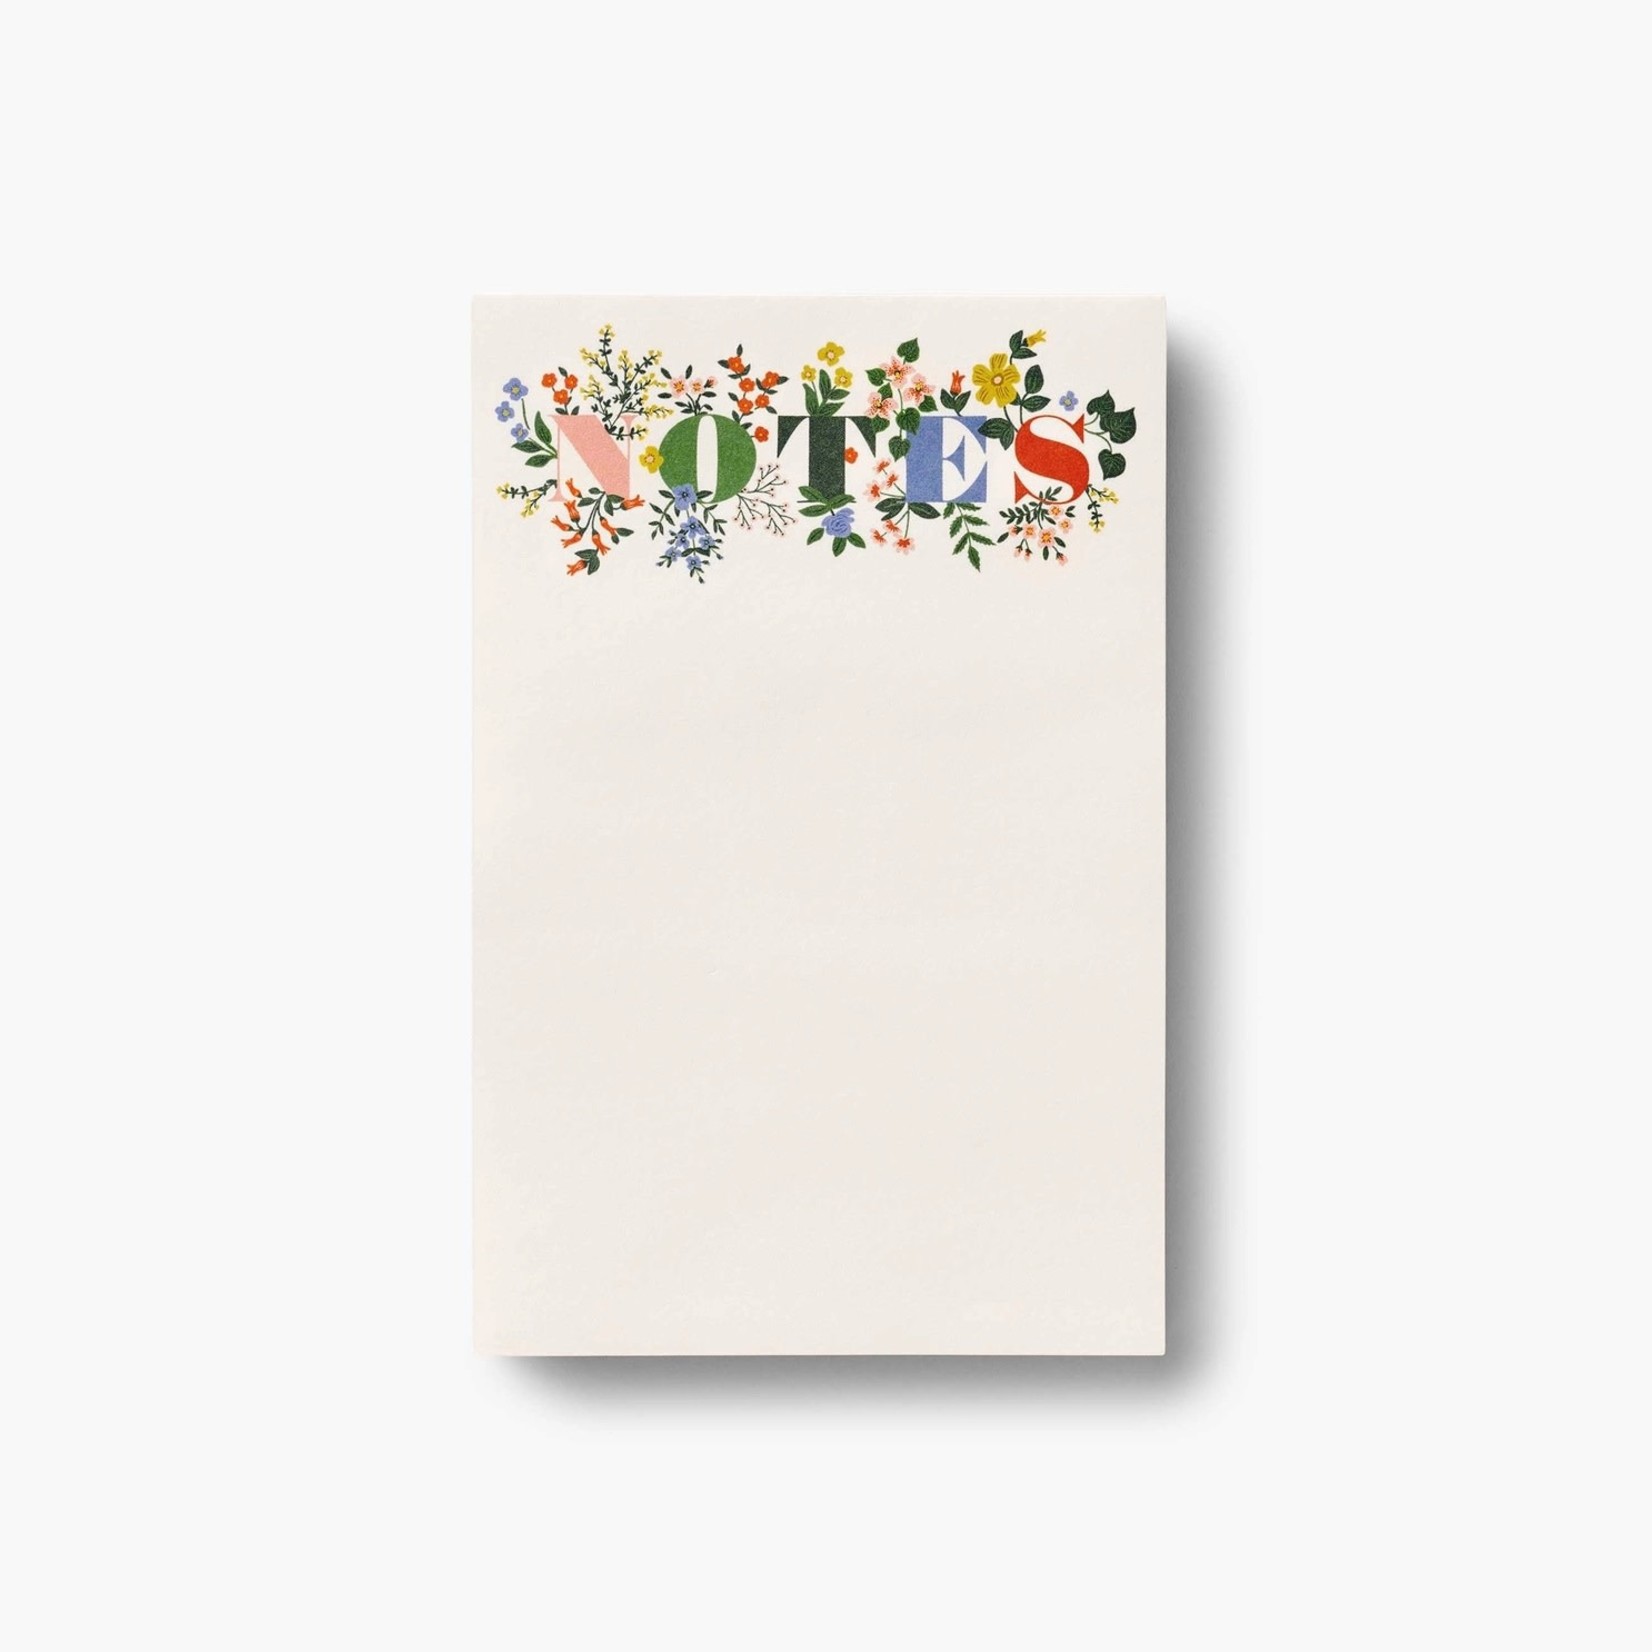 Rifle Paper Co Mayfair Notepad